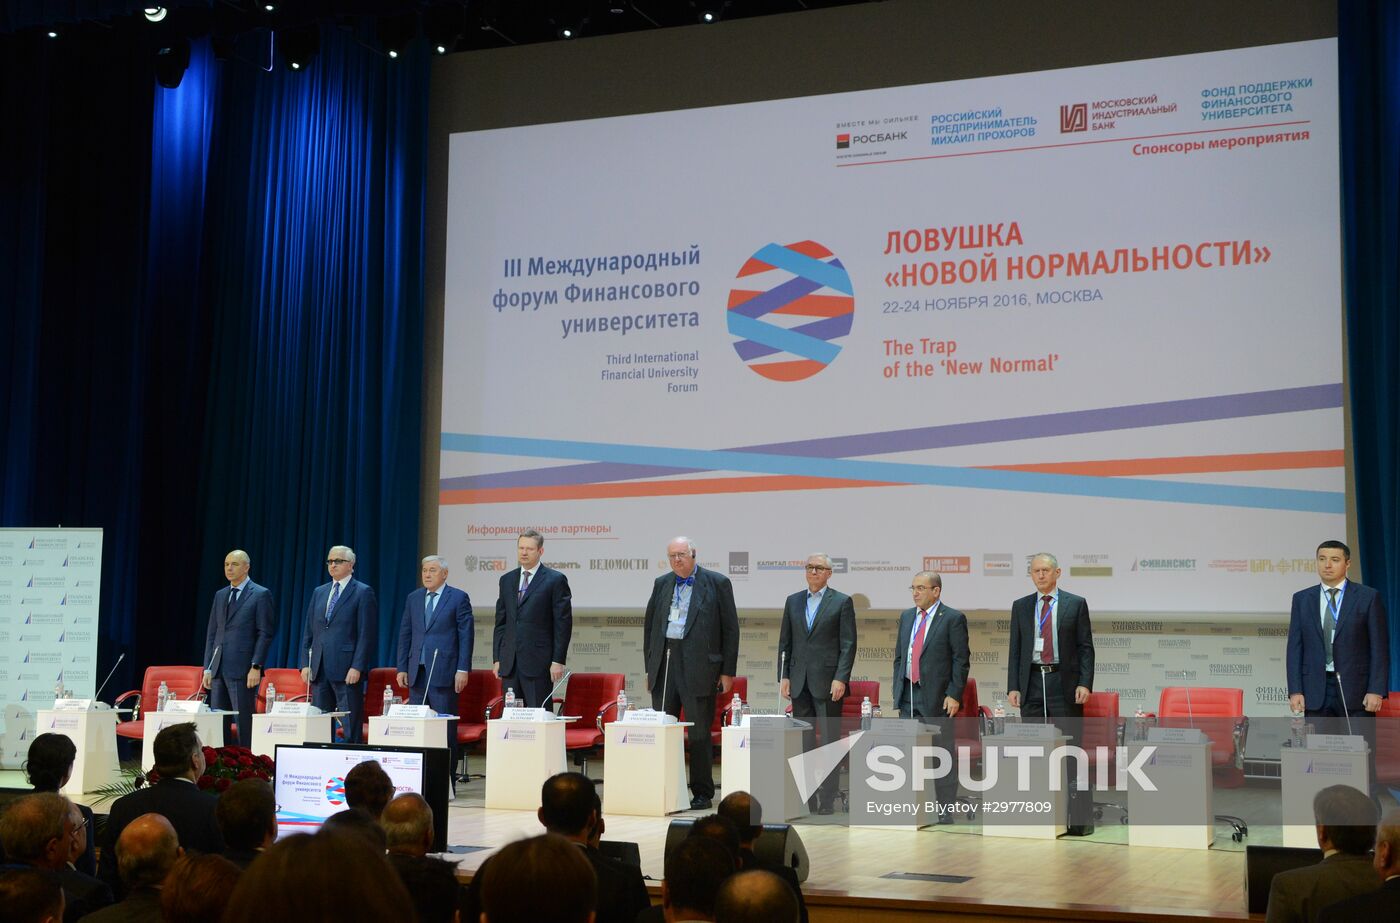 Third International Financial University Forum "The Trap of the New Normal"